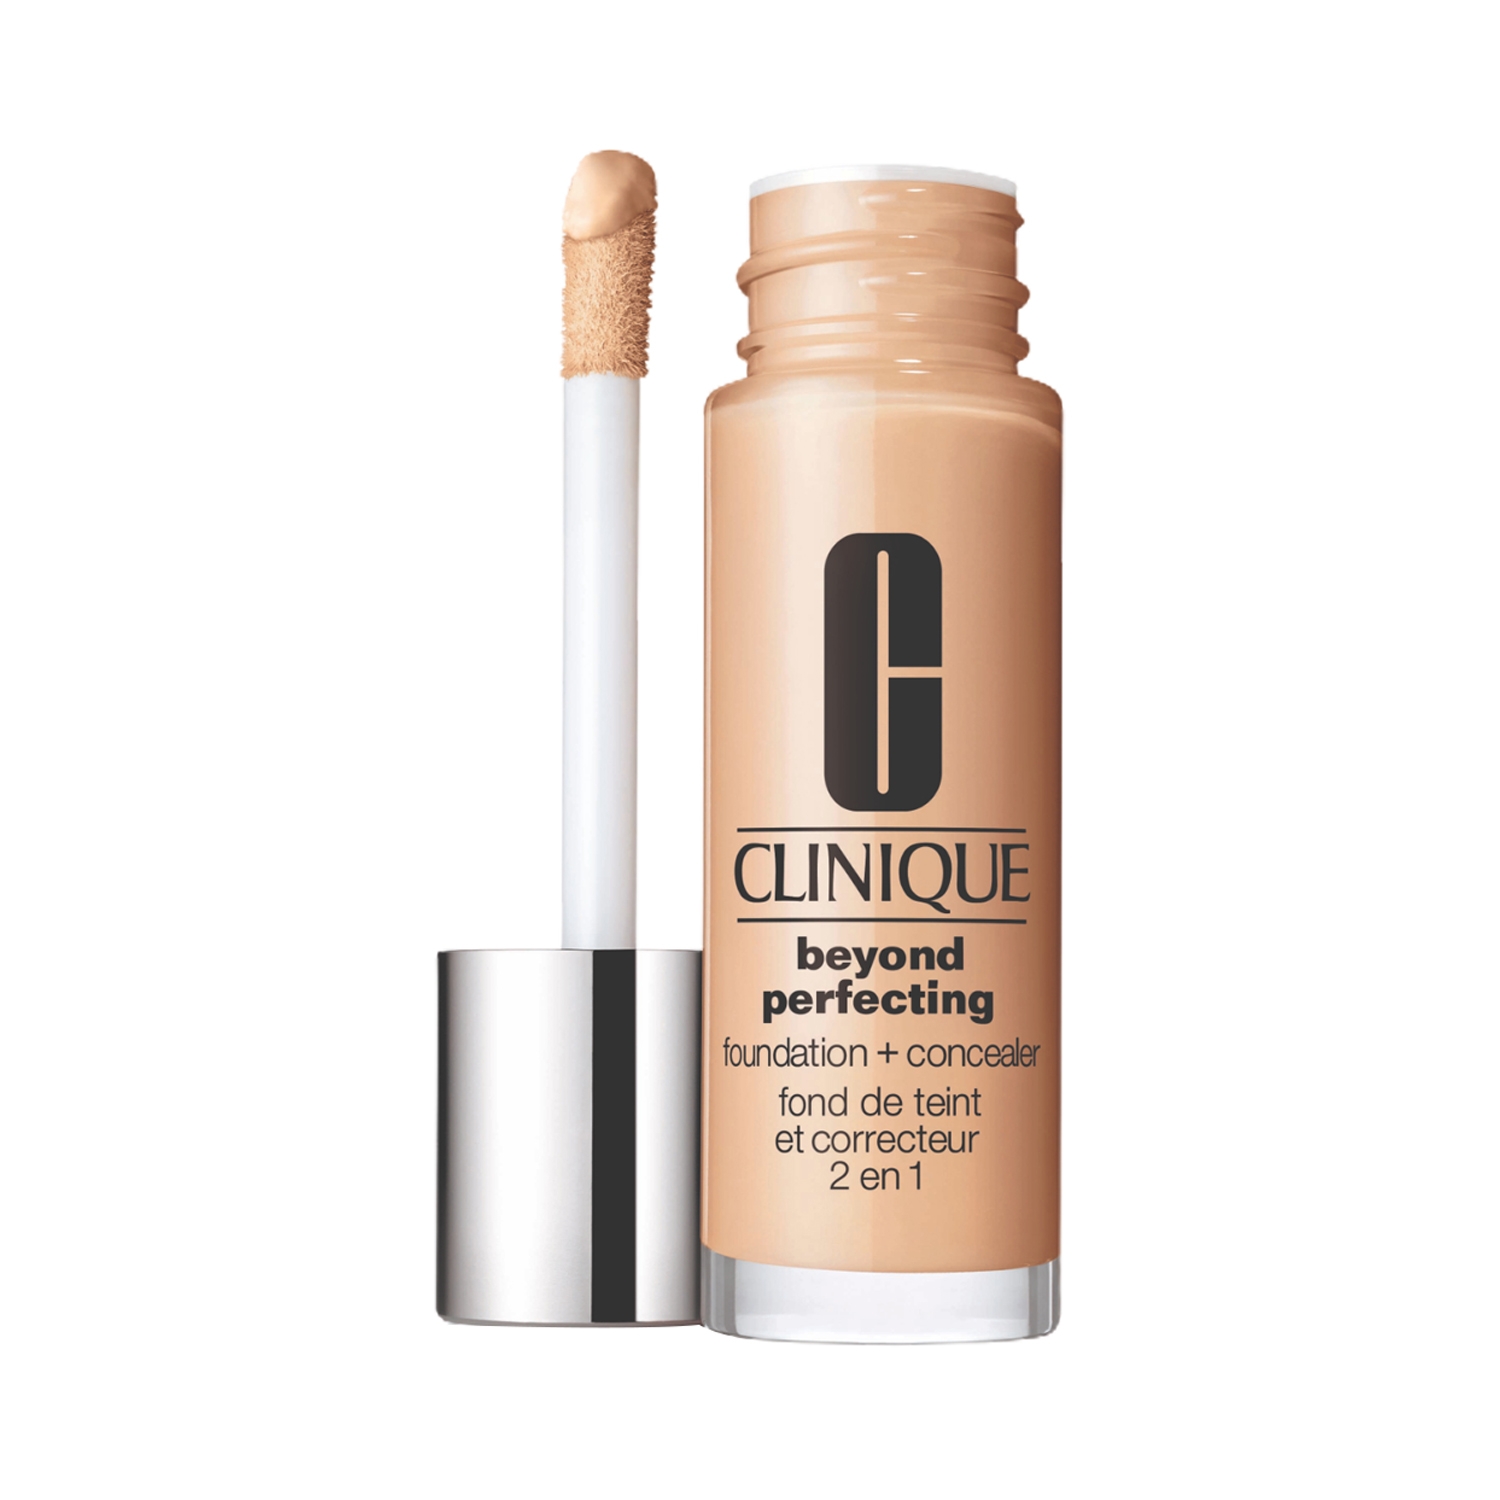 CLINIQUE | CLINIQUE Beyond Perfecting Foundation + Concealer - CN 28 Ivory (30ml)